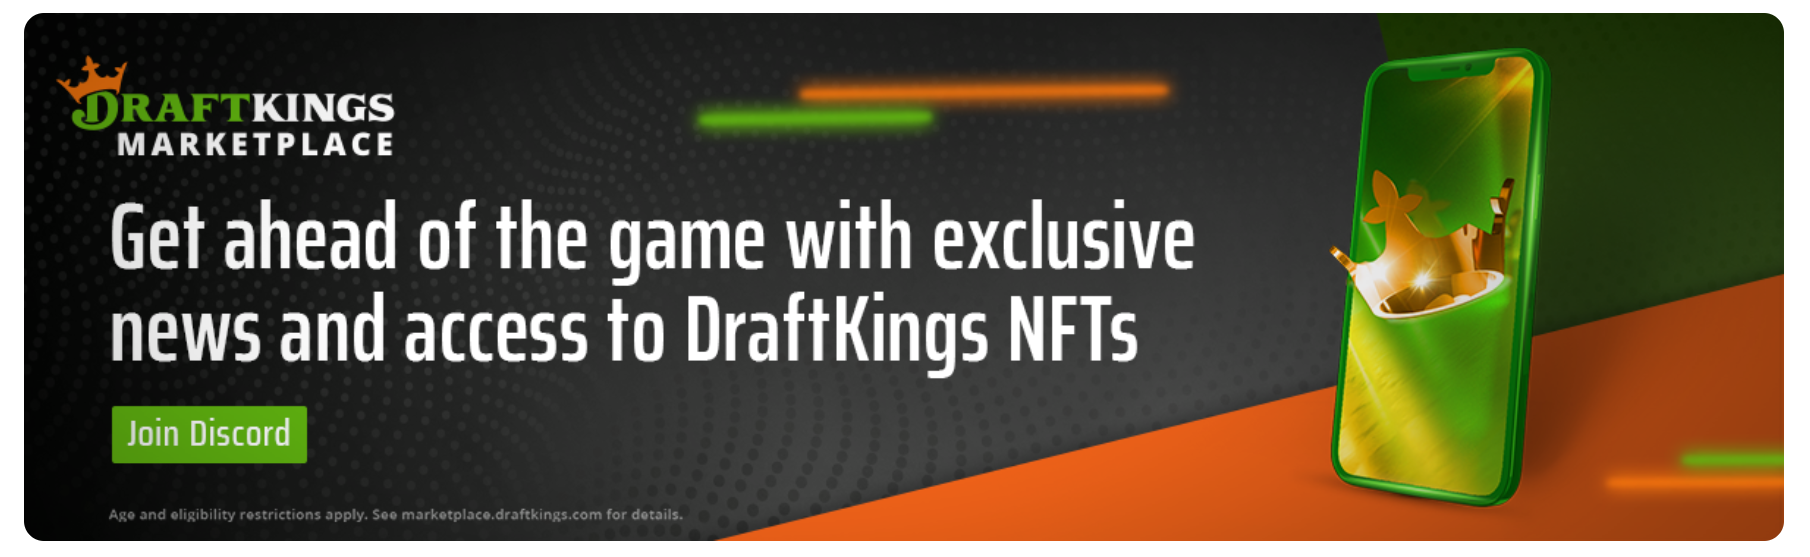 Draftkings marketplace review